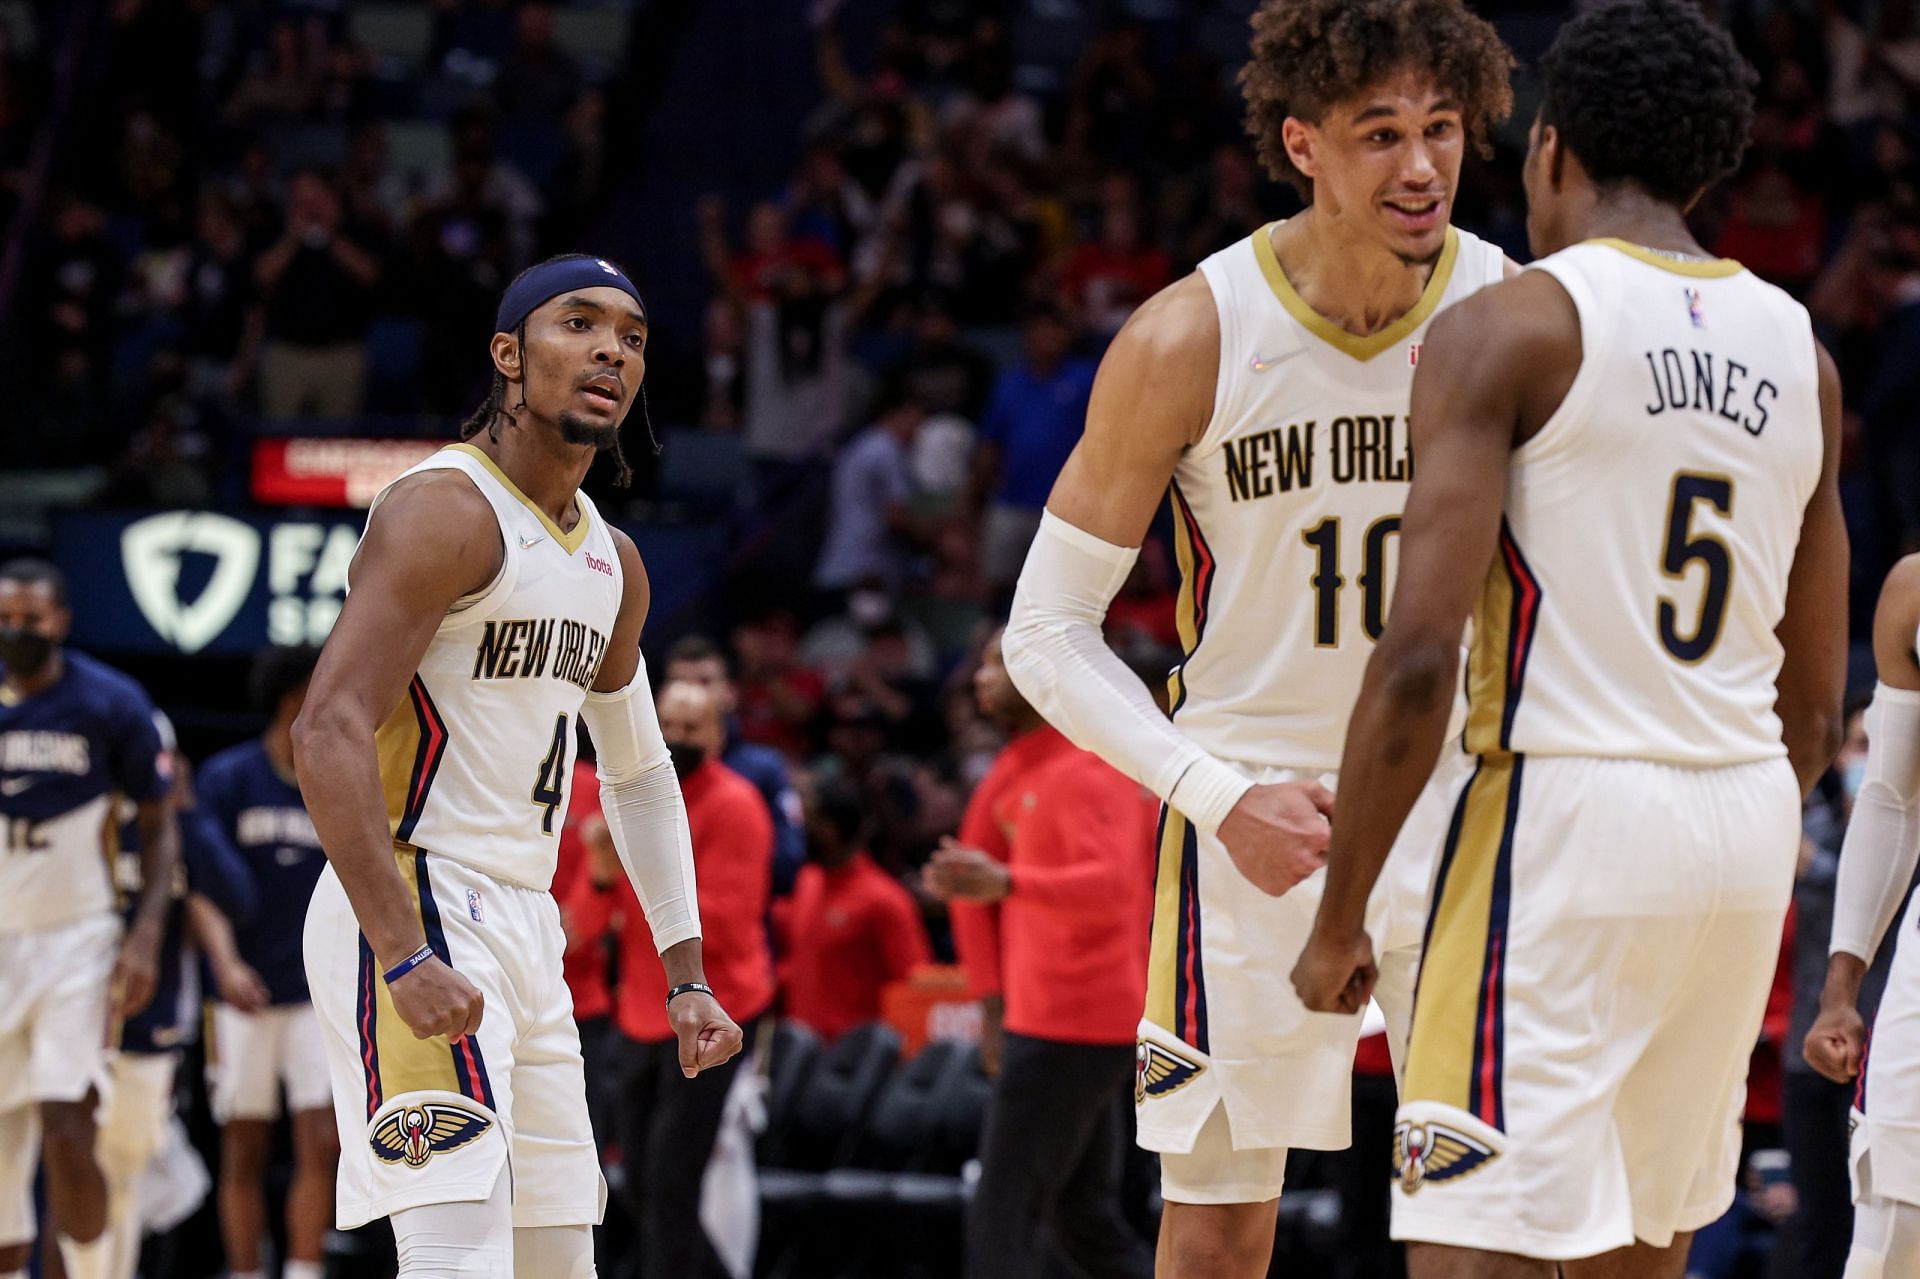 The New Orleans Pelicans have turned to some unheralded names to cause a few upsets this season. [Photo: Pelican Brief]